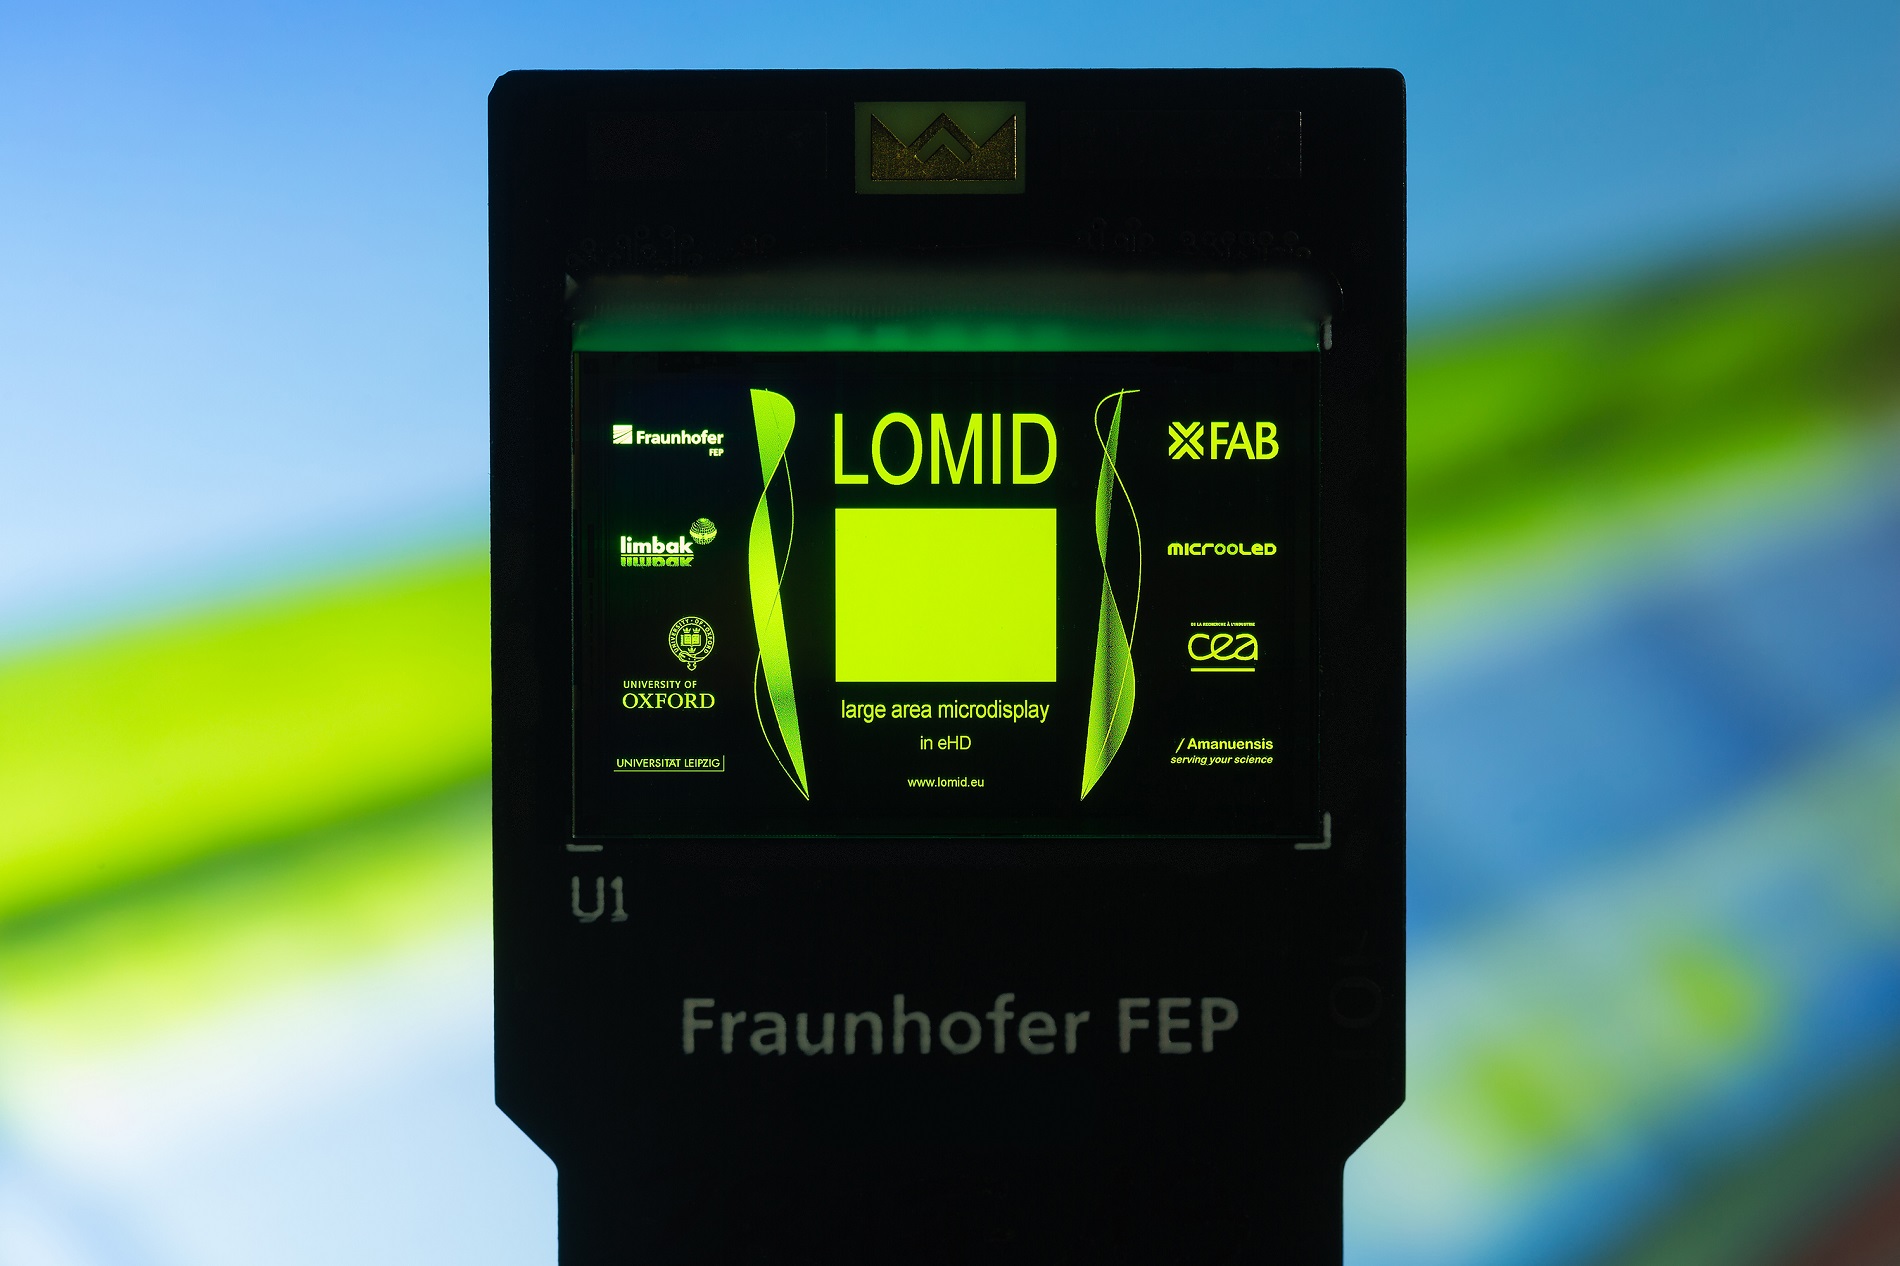 Test and qualification vehicle of the LOMID chip with a screen diagonal of 2.5cm and a resolution of 1920×1200